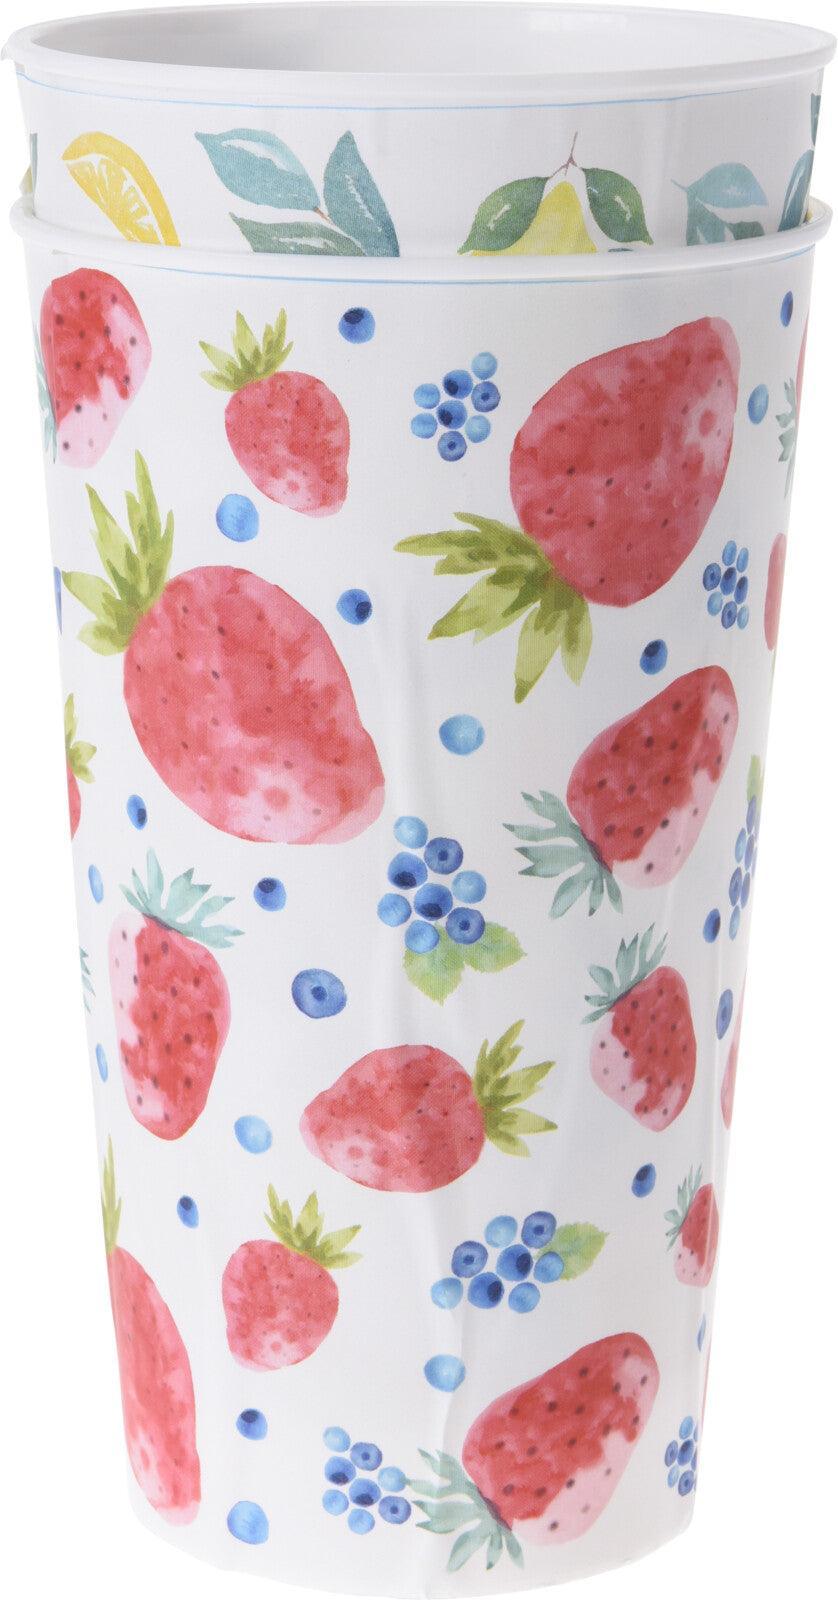 Summer Fruity Design Plastic Cups | 2 Pack - Choice Stores